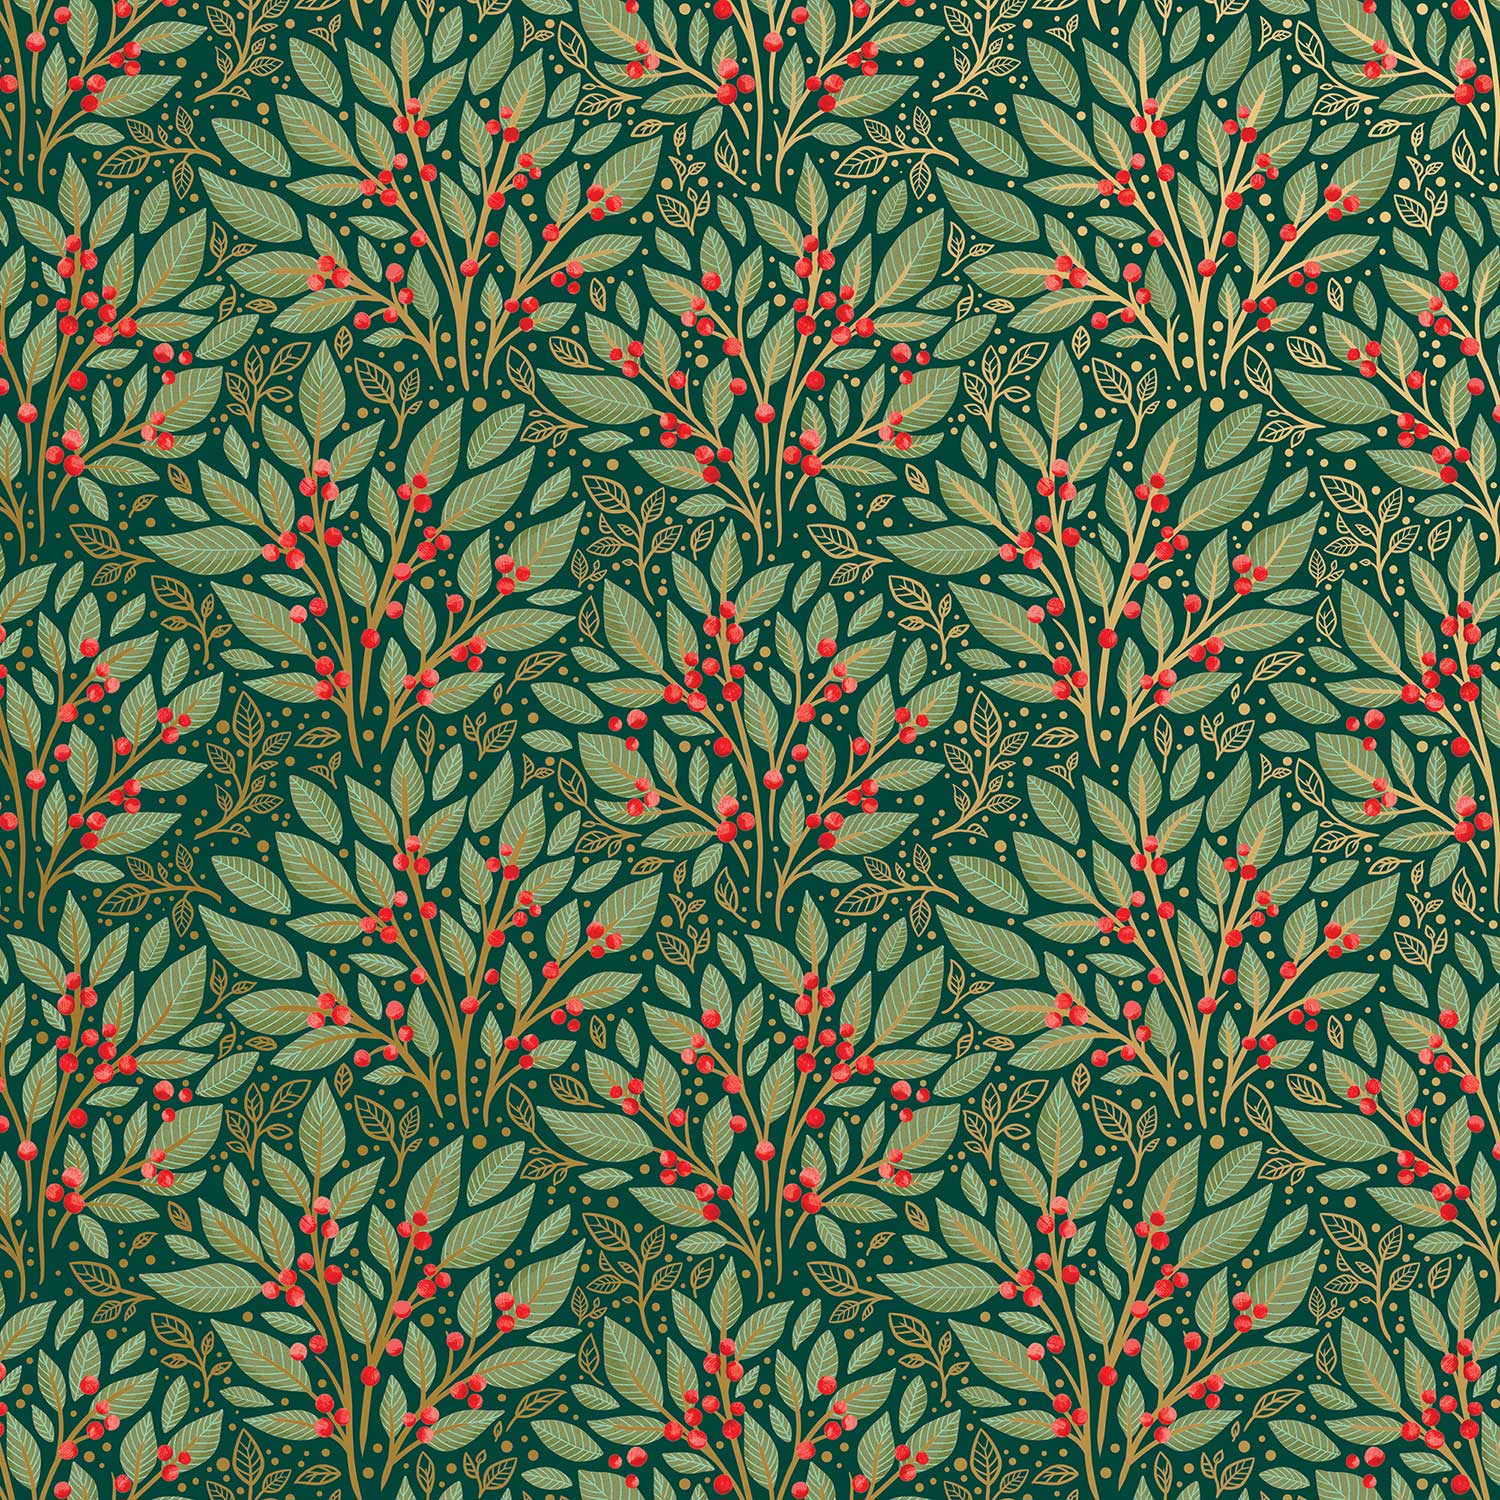 XB634a Green Red Holly Christmas Gift Wrapping Paper Swatch 